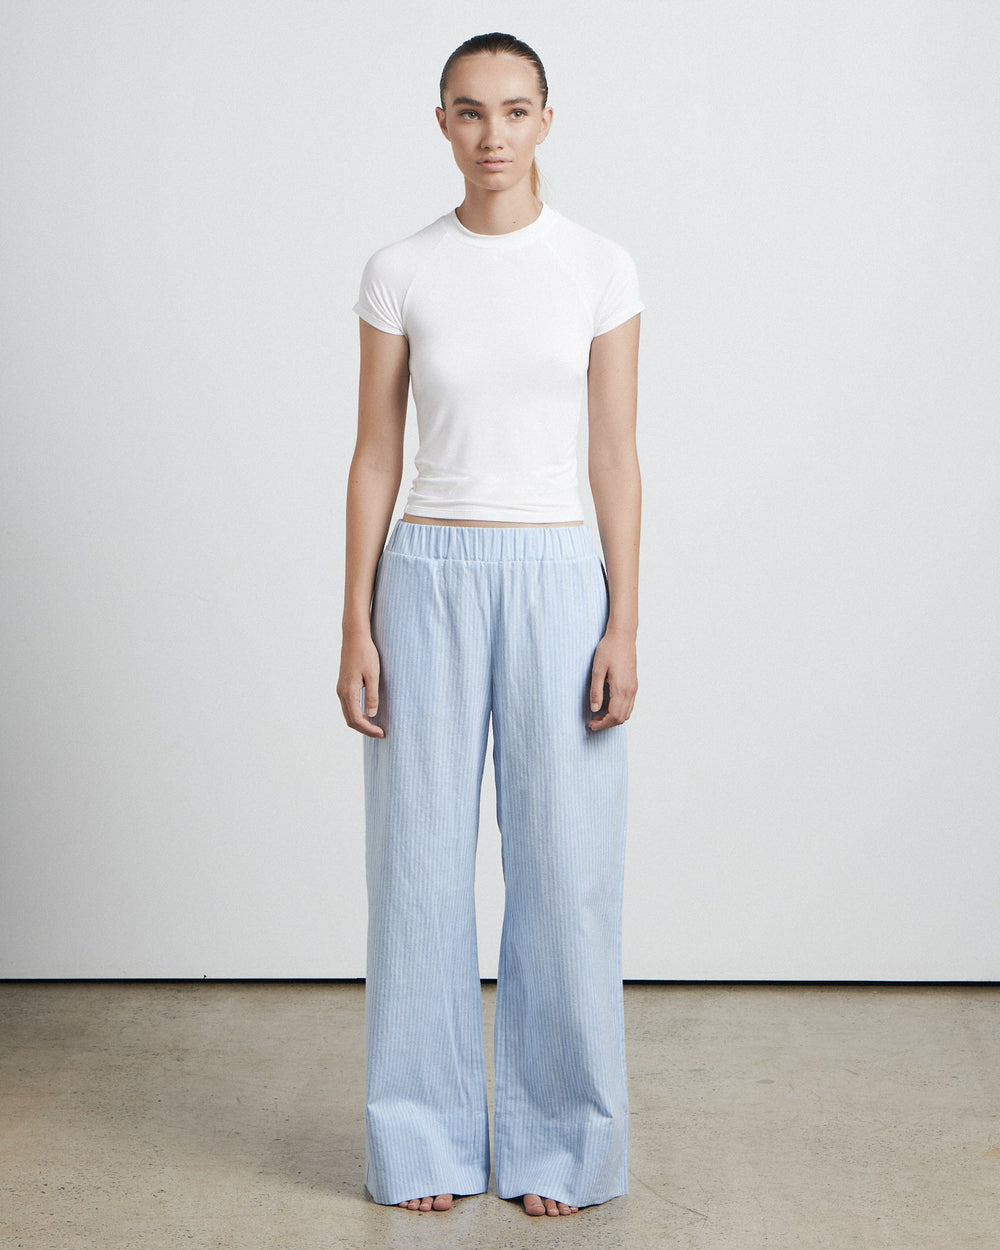 The Mid Rise Relaxed Pant